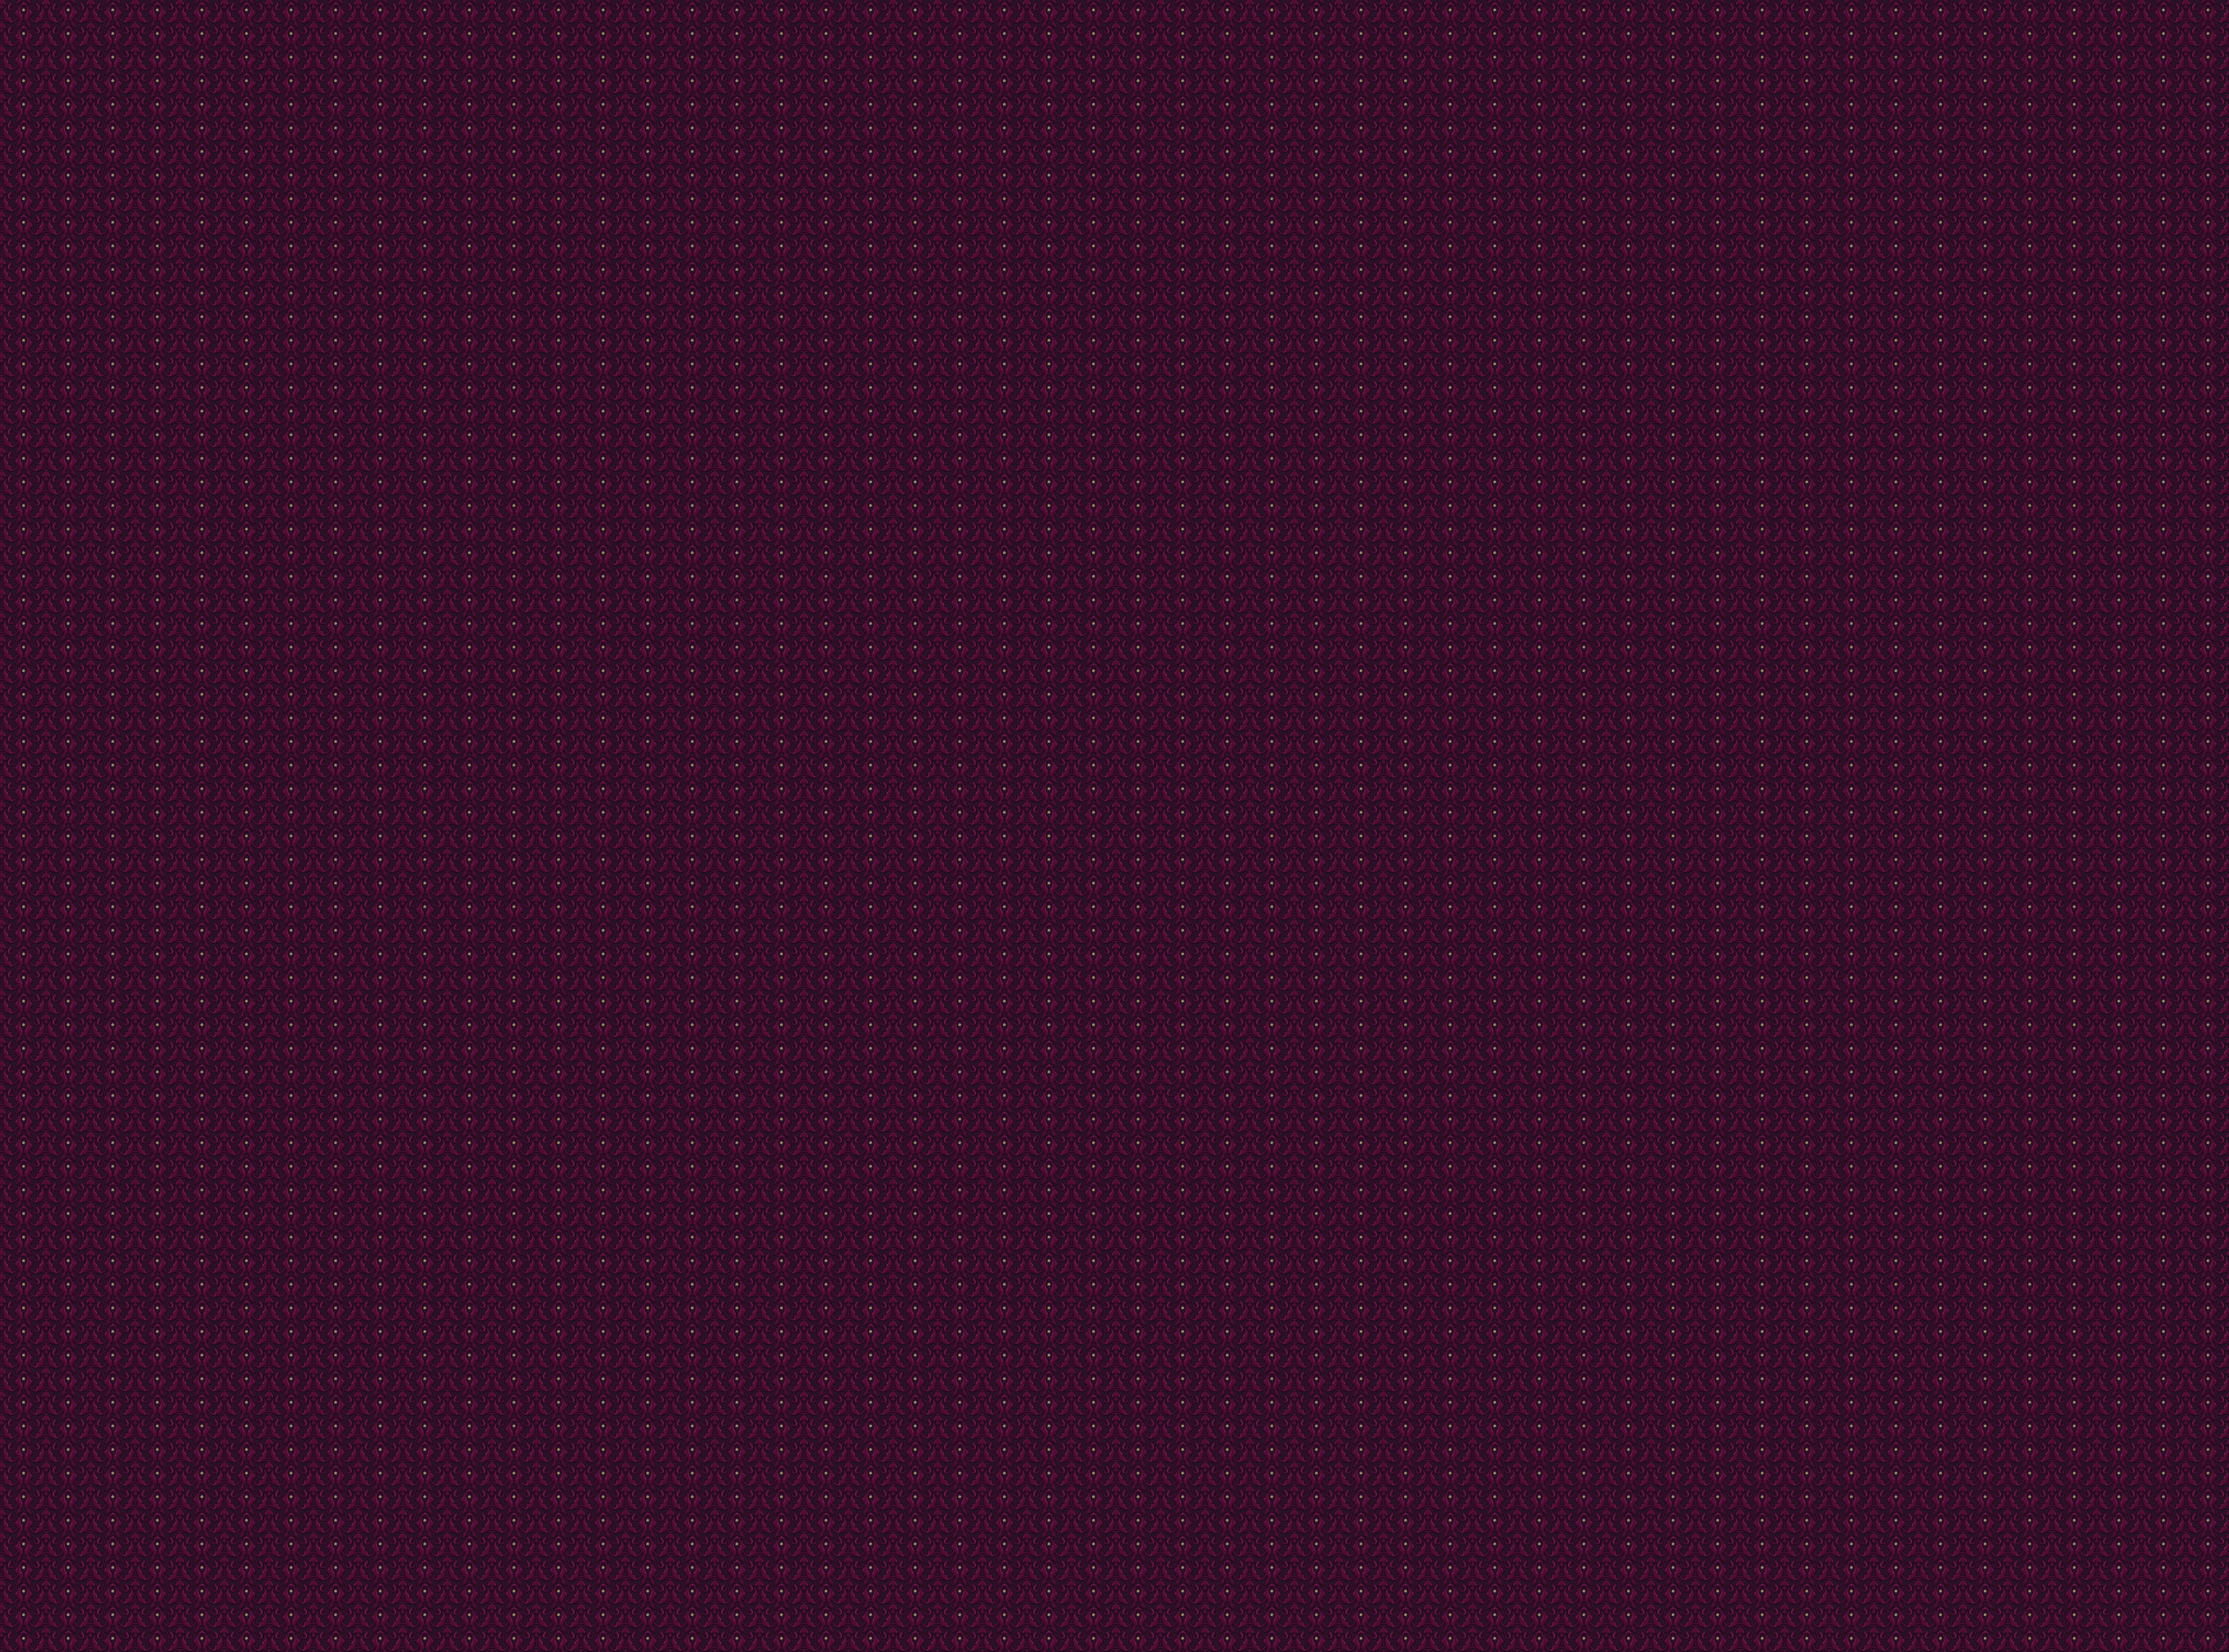 25 Free Graphical Interior Seamless Patterns Backgrounds HD Wallpapers Download Free Images Wallpaper [wallpaper981.blogspot.com]